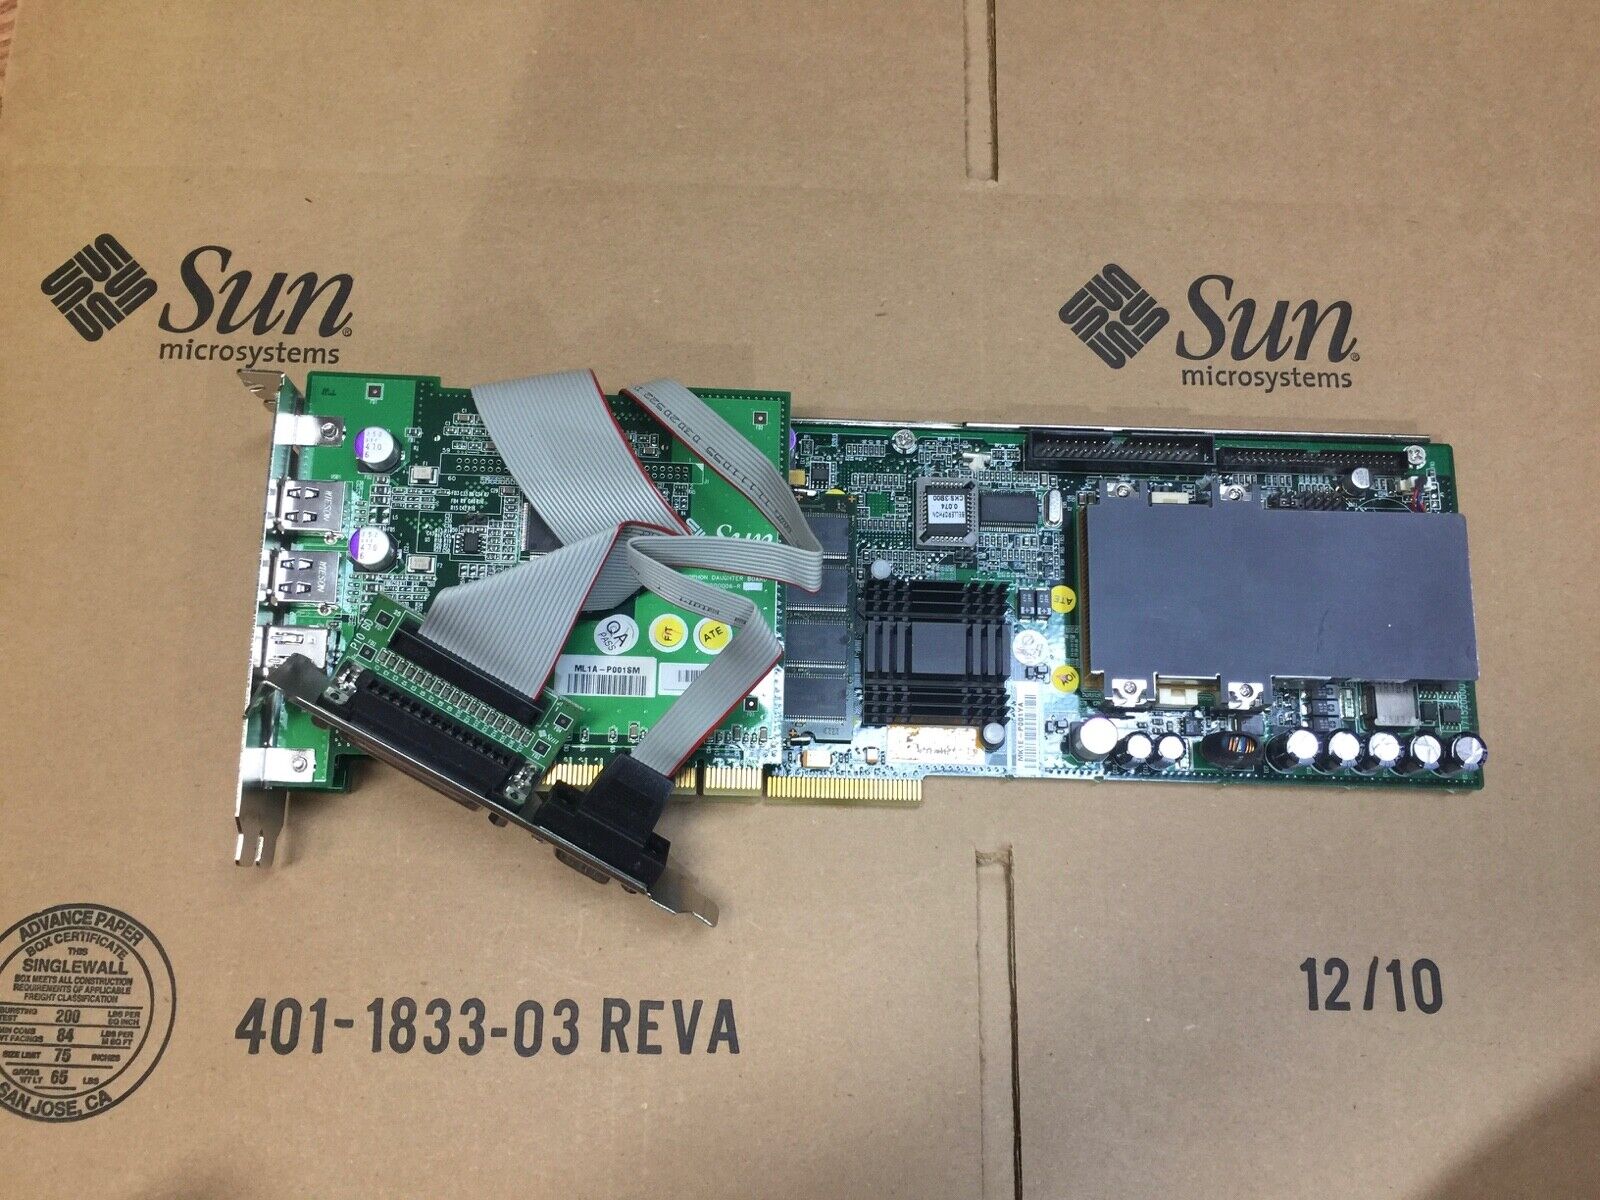 SUN SunPCi III 1.4GHz Co-Pro,512mb-RAM,375-3116-04, with SERIAL Cable Test-PASS